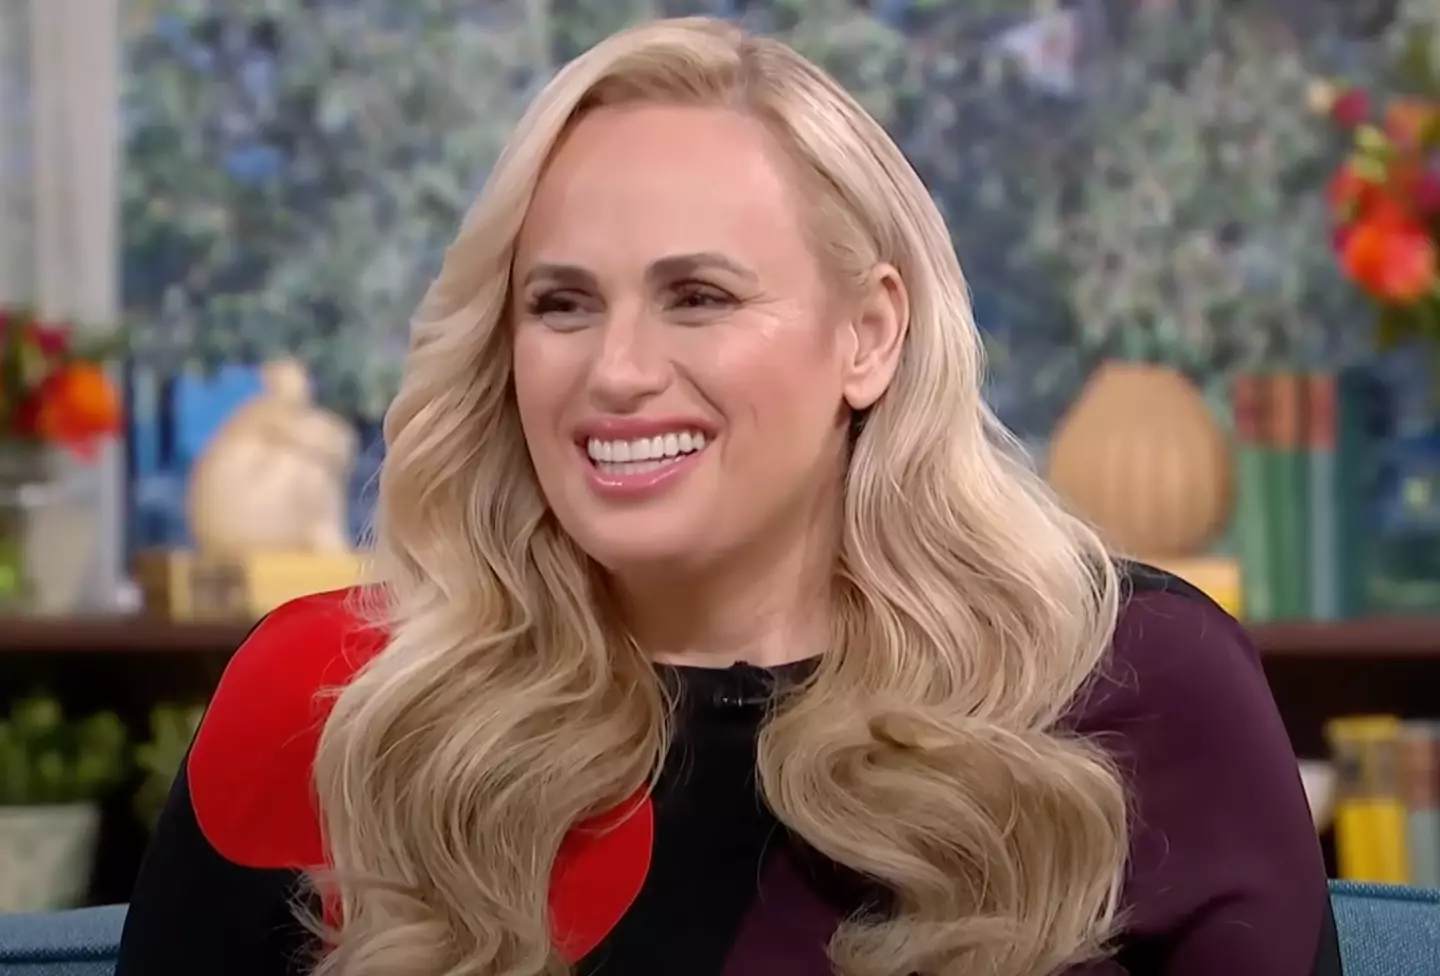 Rebel Wilson says she dated 50 men as an 'experiment'. (ITV)